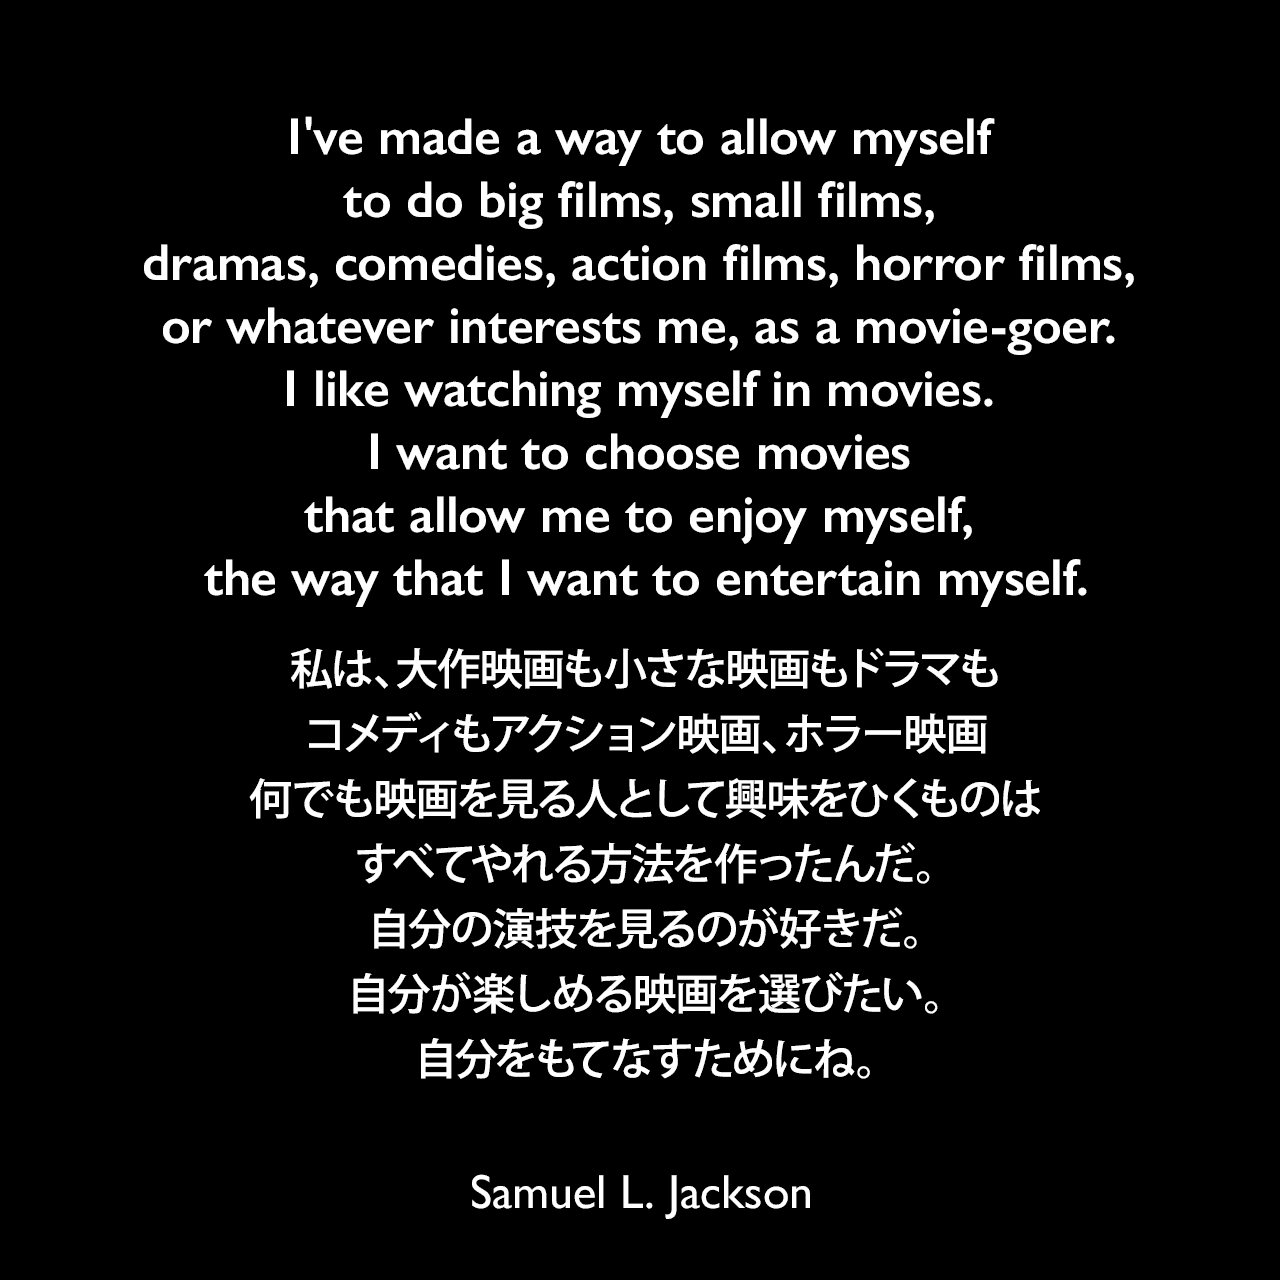 I've made a way to allow myself to do big films, small films, dramas, comedies, action films, horror films, or whatever interests me, as a movie-goer. I like watching myself in movies. I want to choose movies that allow me to enjoy myself, the way that I want to entertain myself.私は、大作映画も小さな映画もドラマもコメディもアクション映画、ホラー映画、何でも映画を見る人として興味をひくものは、すべてやれる方法を作ったんだ。自分の演技を見るのが好きだ。自分が楽しめる映画を選びたい。自分をもてなすためにね。Samuel Leroy Jackson